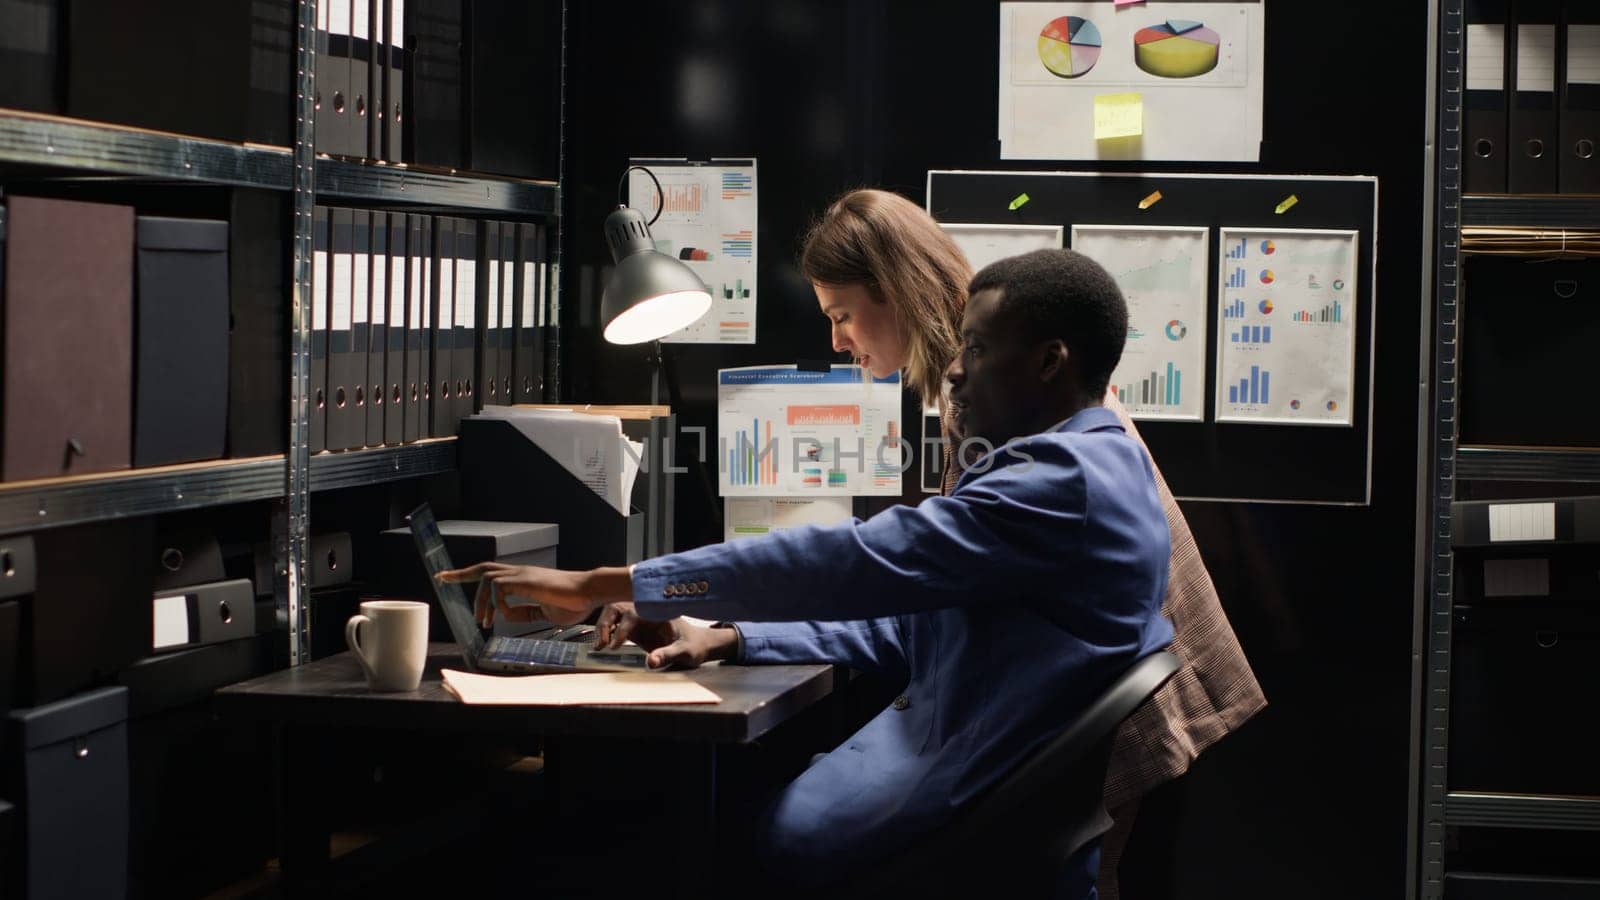 Diverse detectives in well-organized office reviewing evidence, surrounded by shelves filled with files. Two law enforcement officers with laptop, diligently investigate criminal profiles and records.